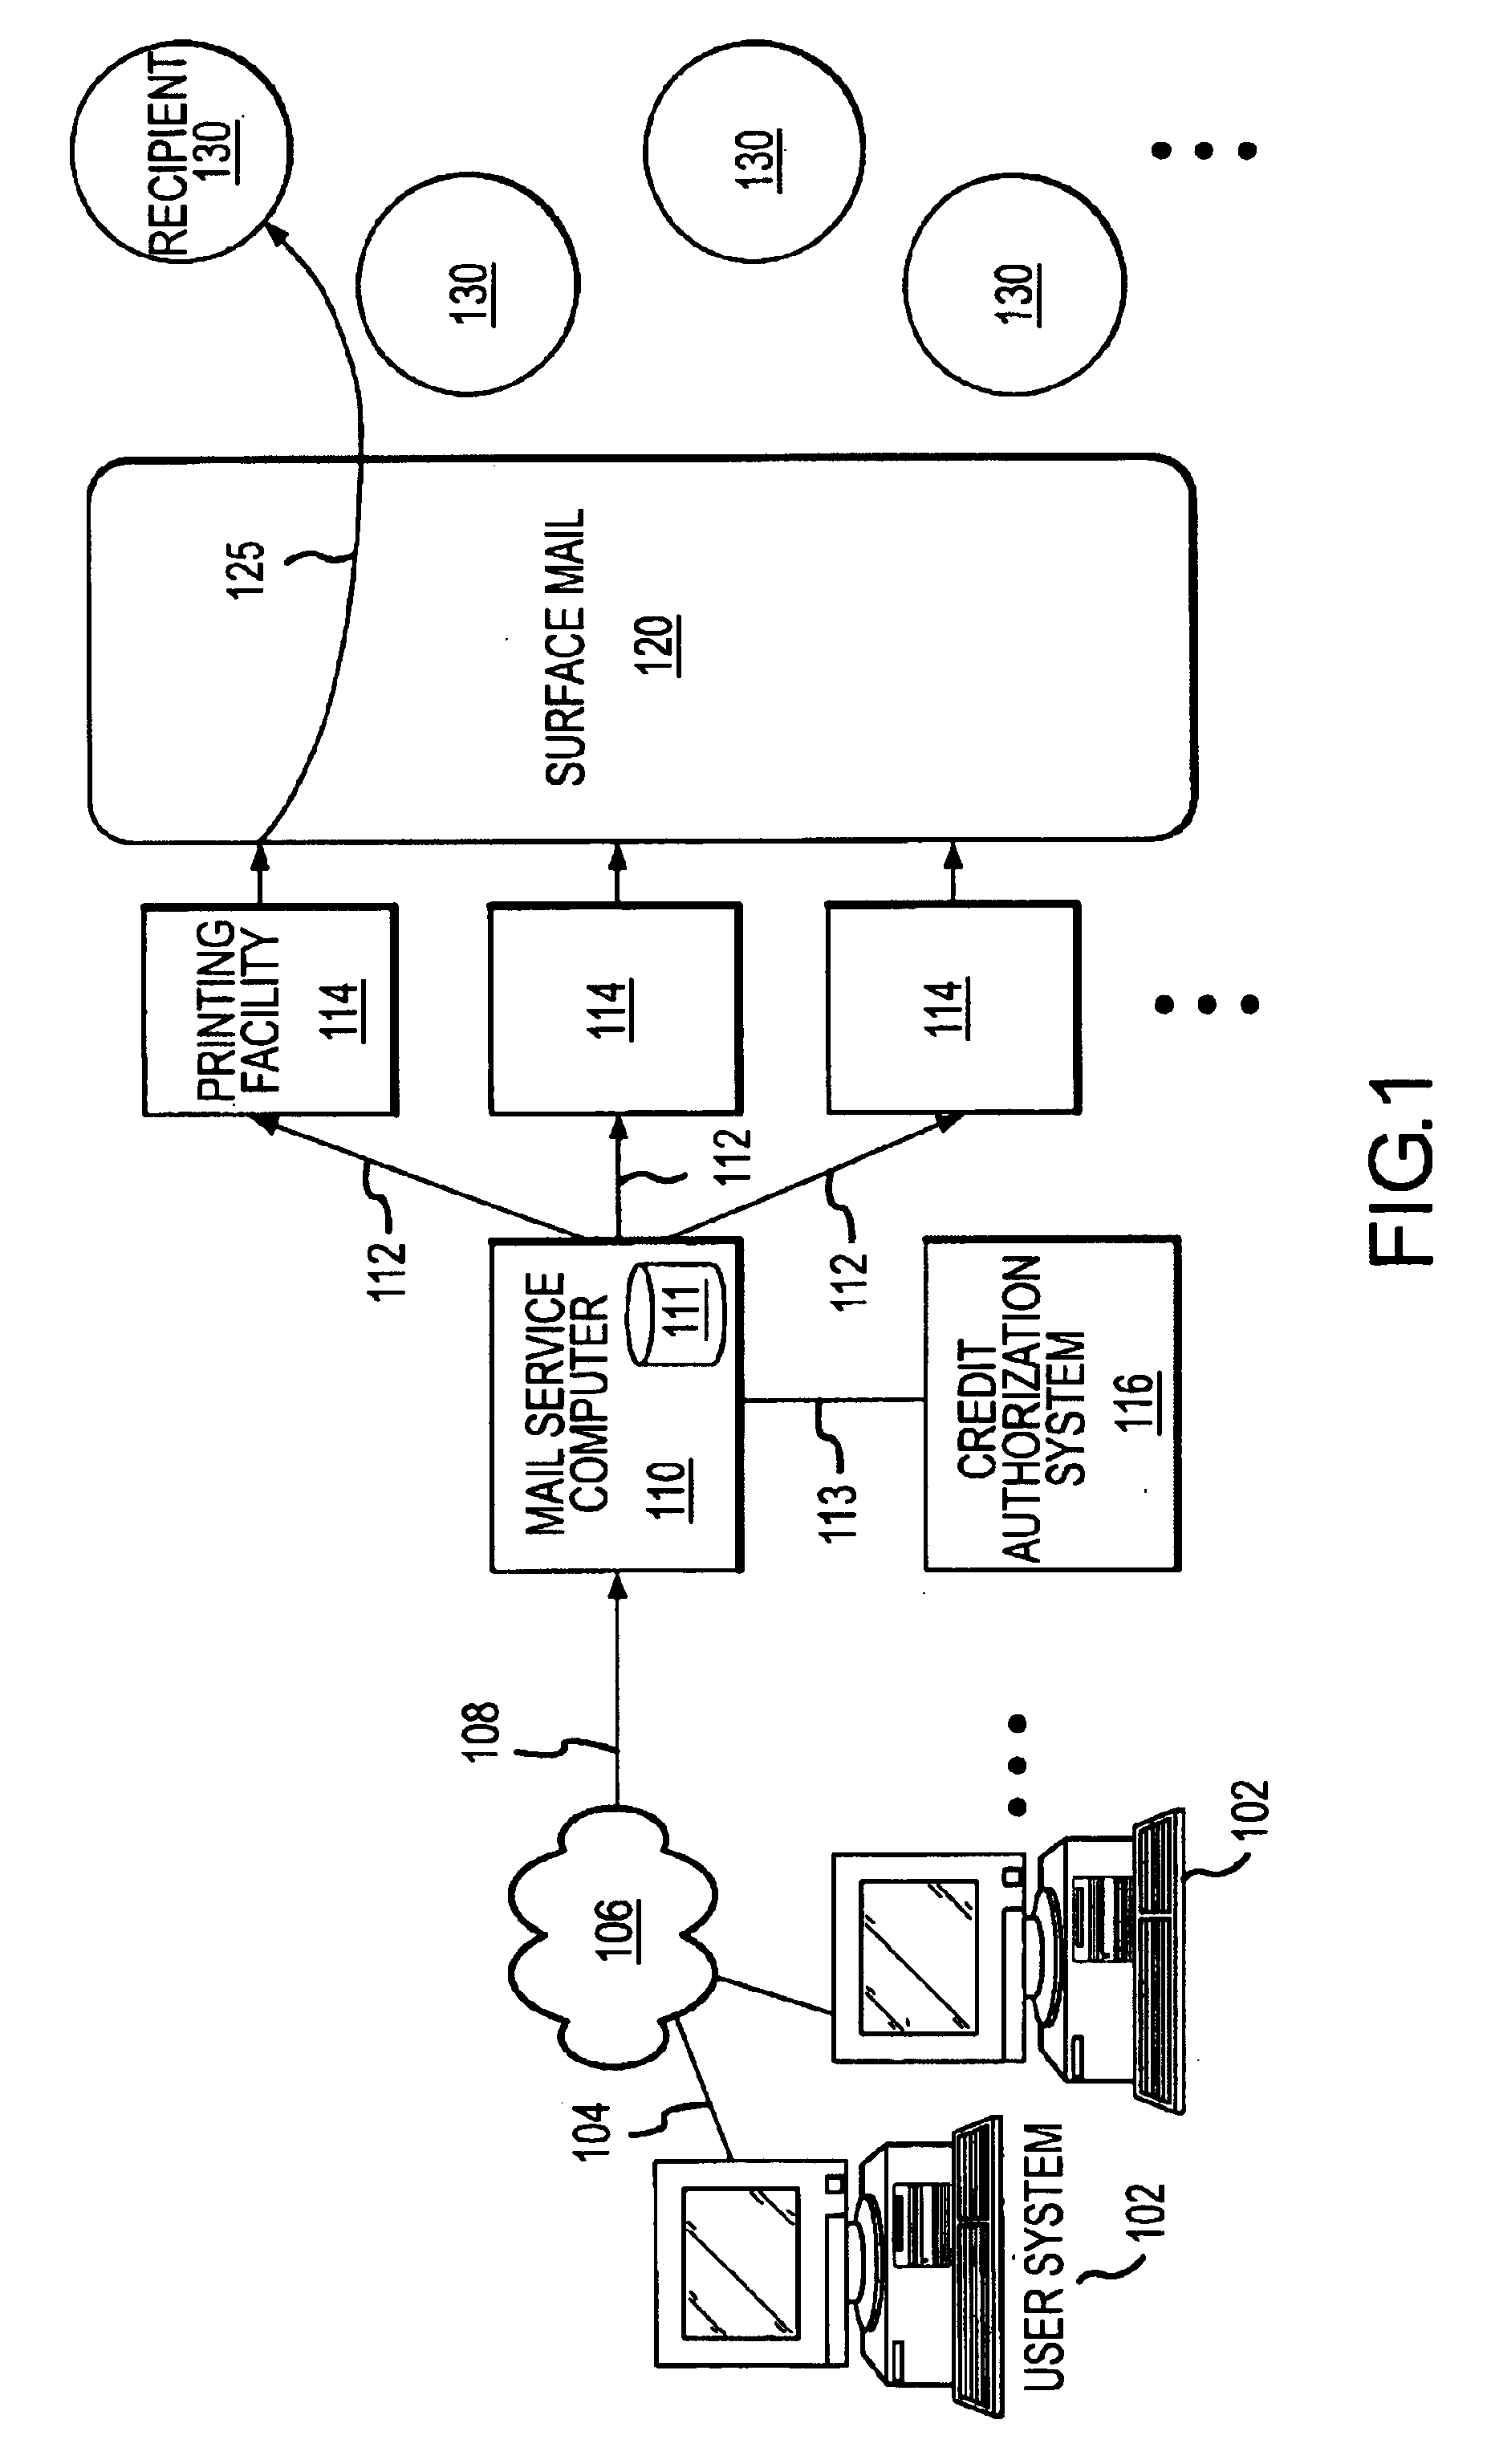 Methods and apparatus for generation and distribution of surface mail objects